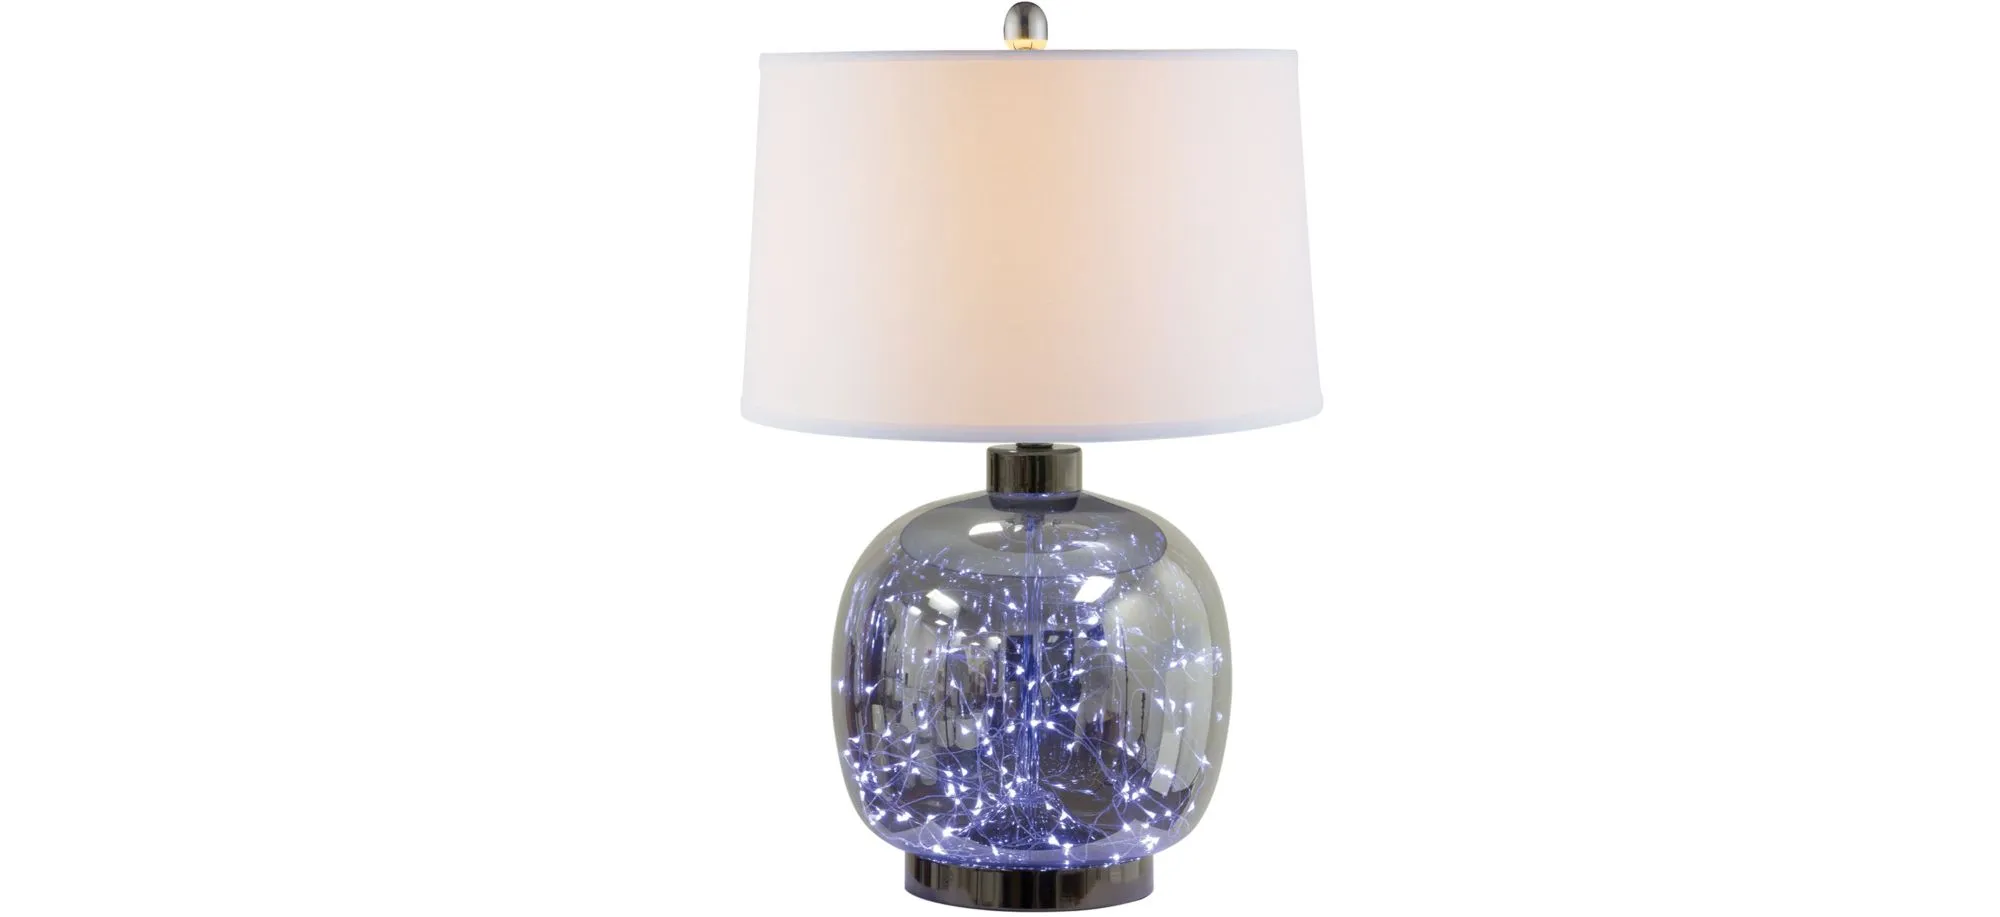 Mileena Table Lamp w/Night Light in Gray by Anthony California